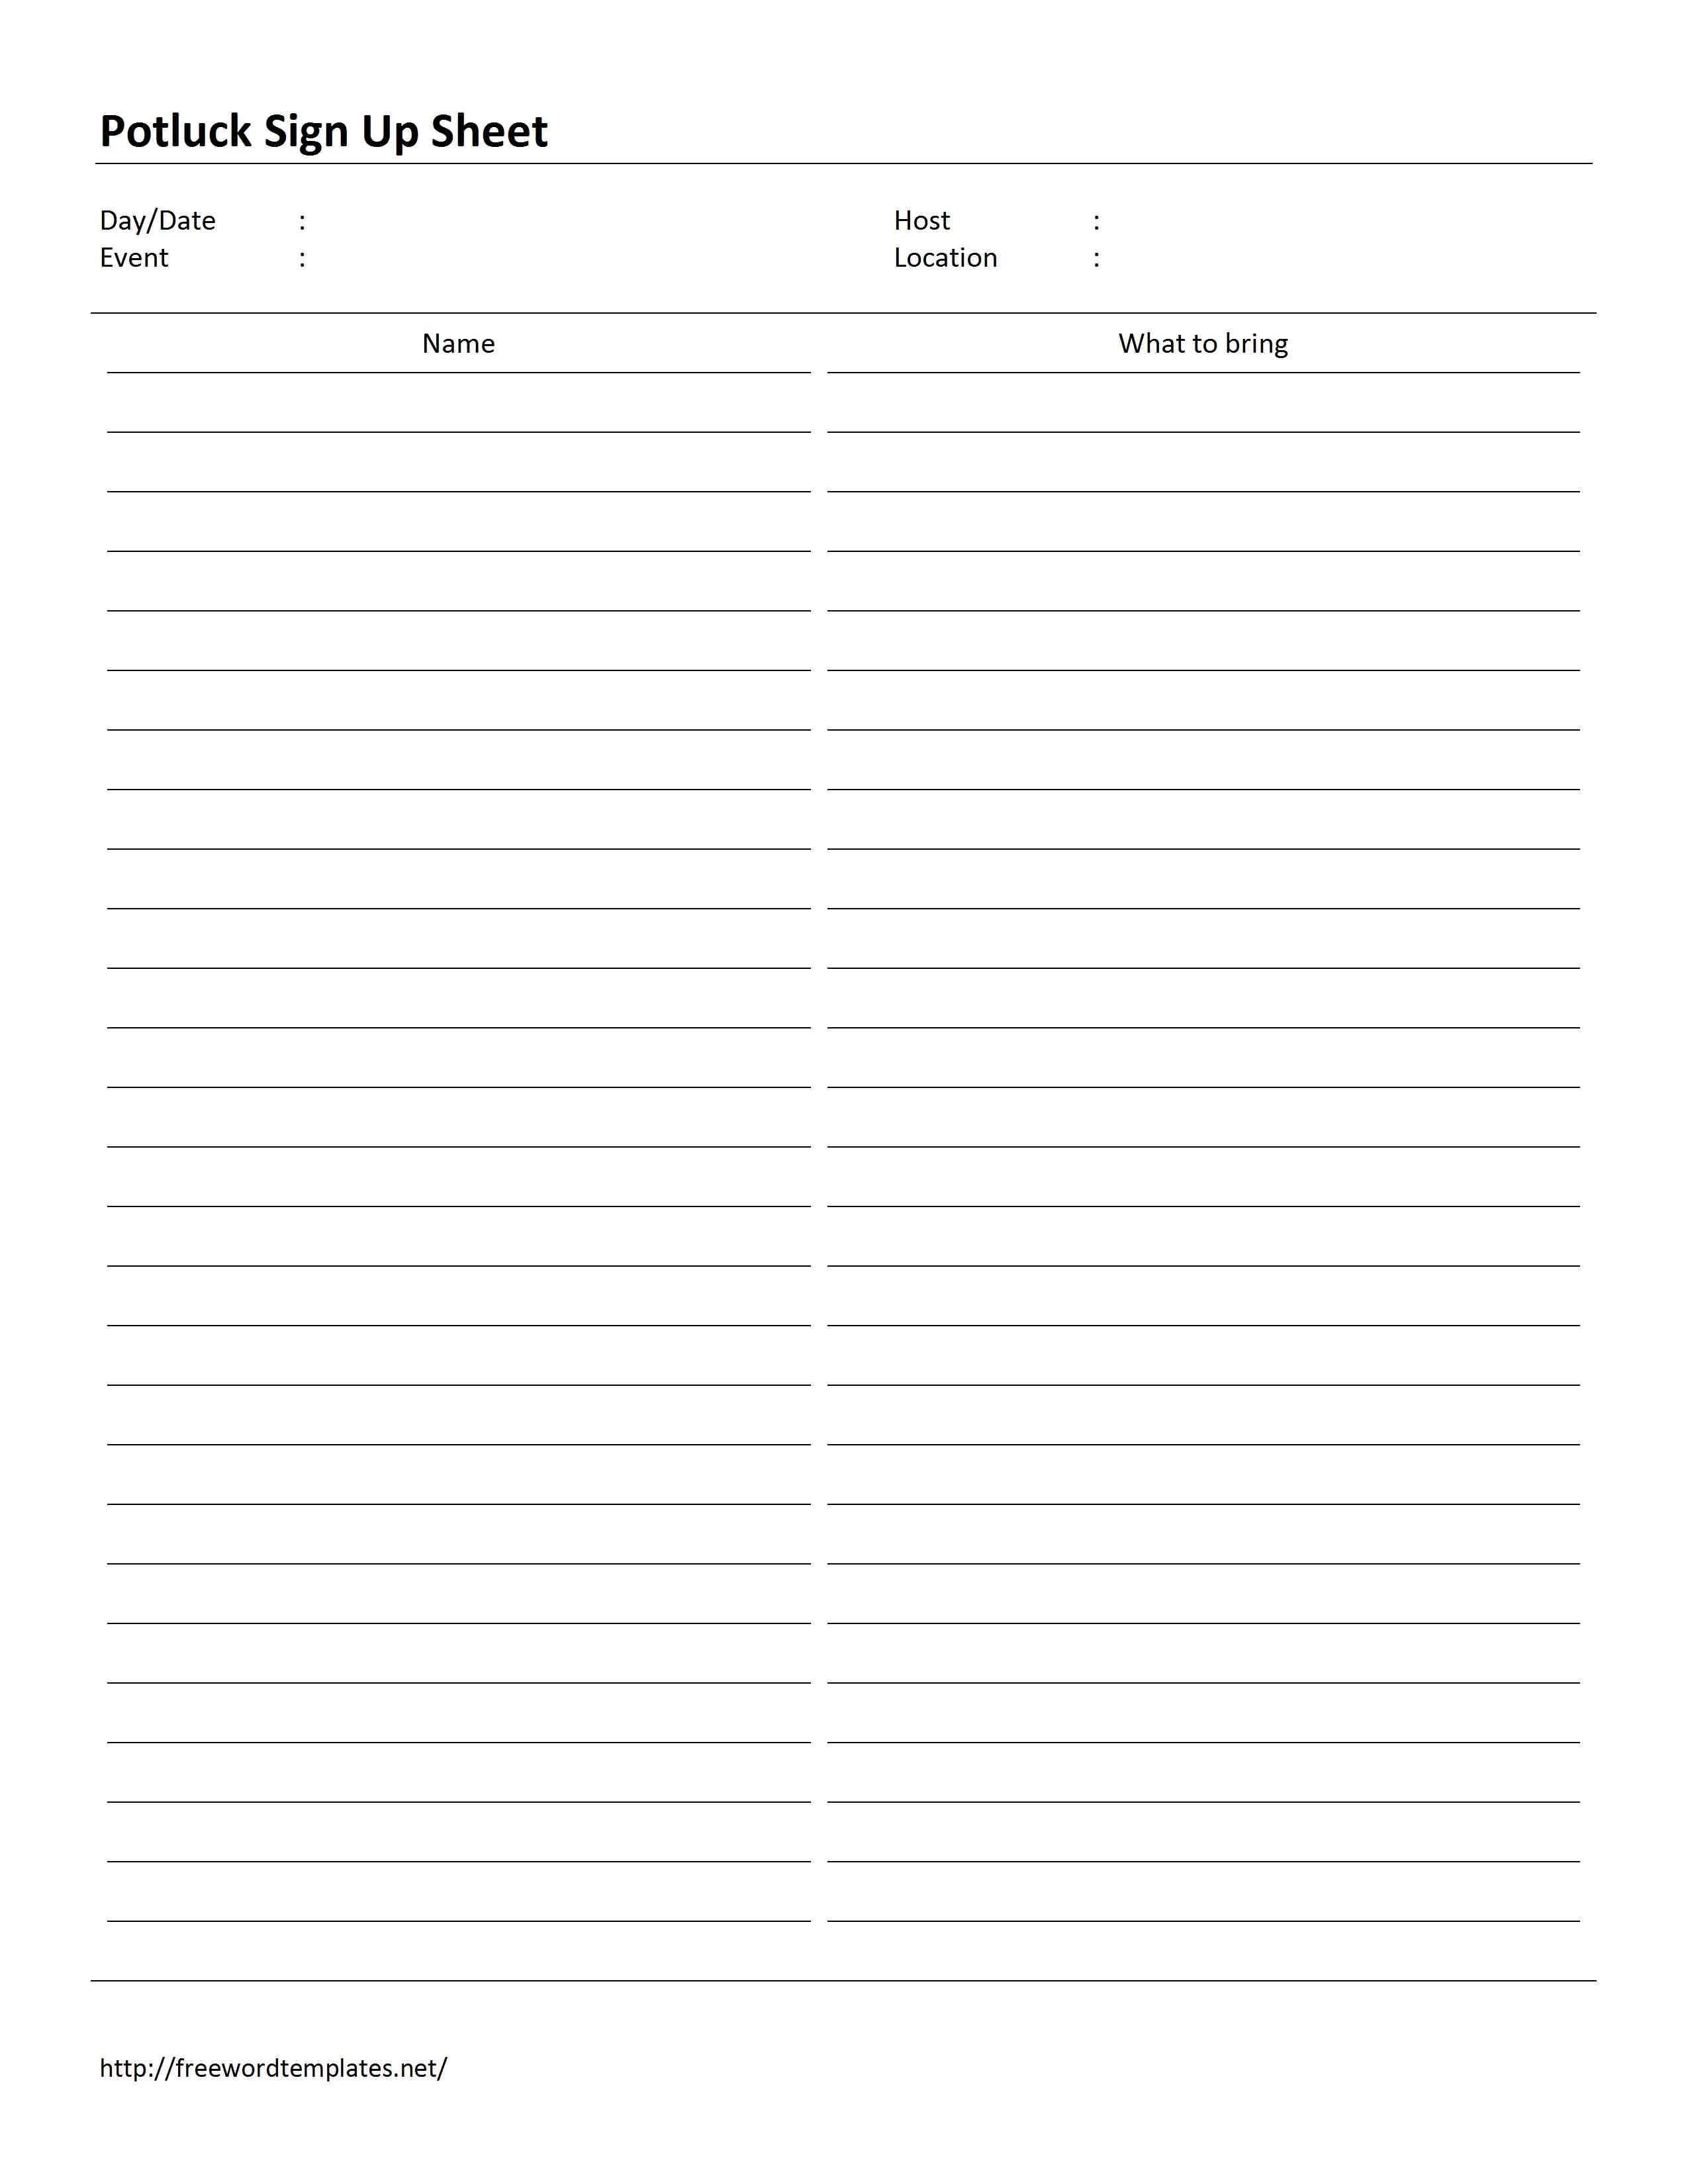 Pinchris Smith On Grandmachrisee's | Sign Up Sheets Inside Potluck Signup Sheet Template Word